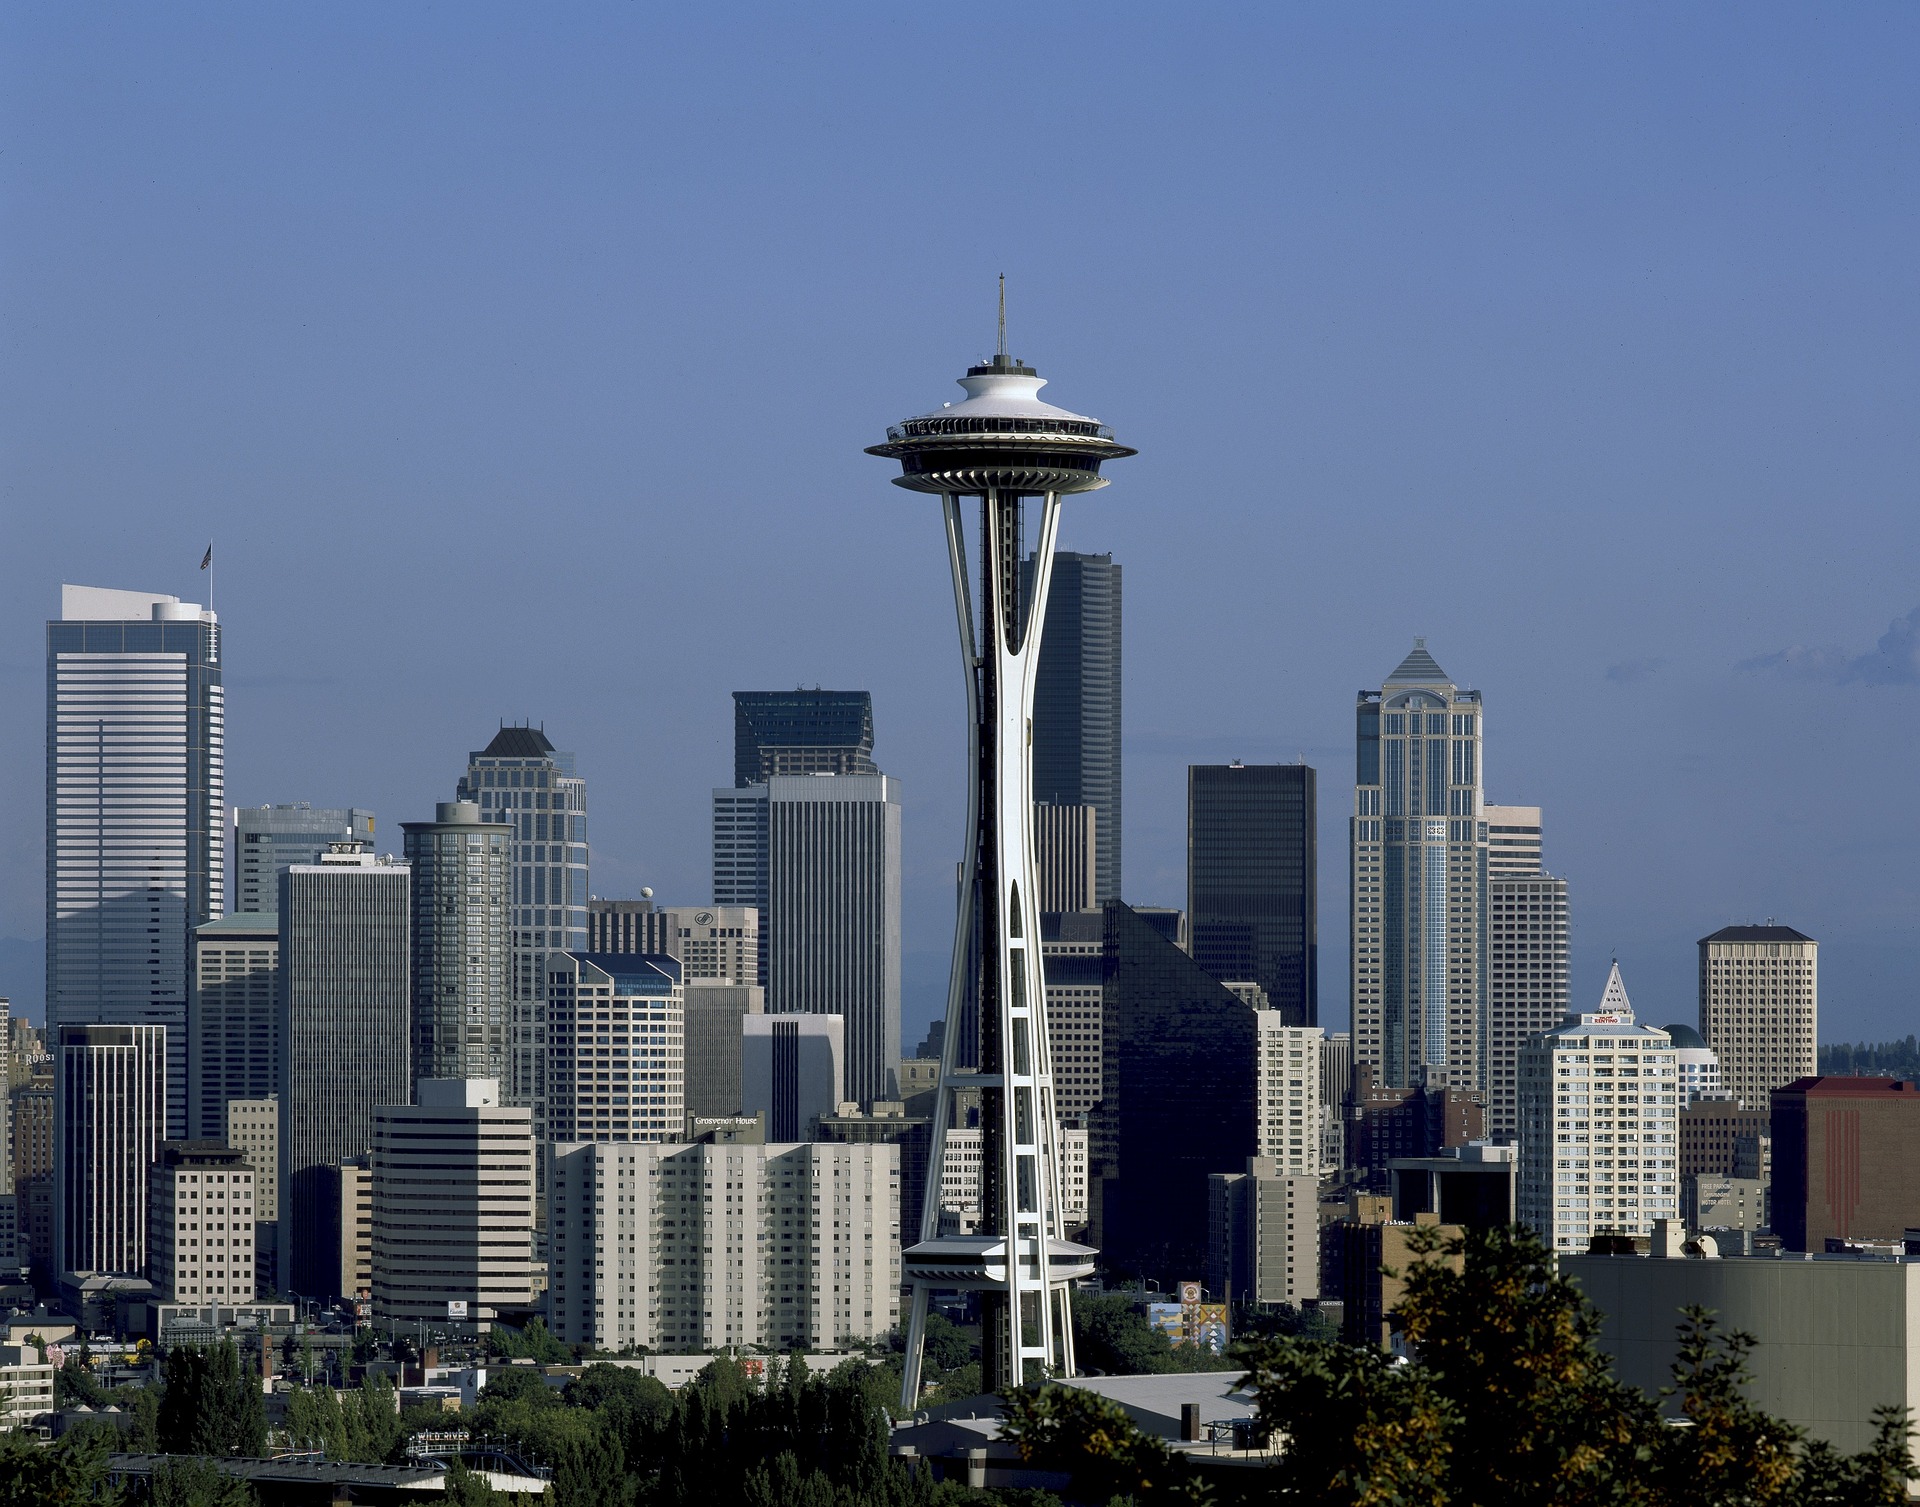 Seattle skyline with Space Needle